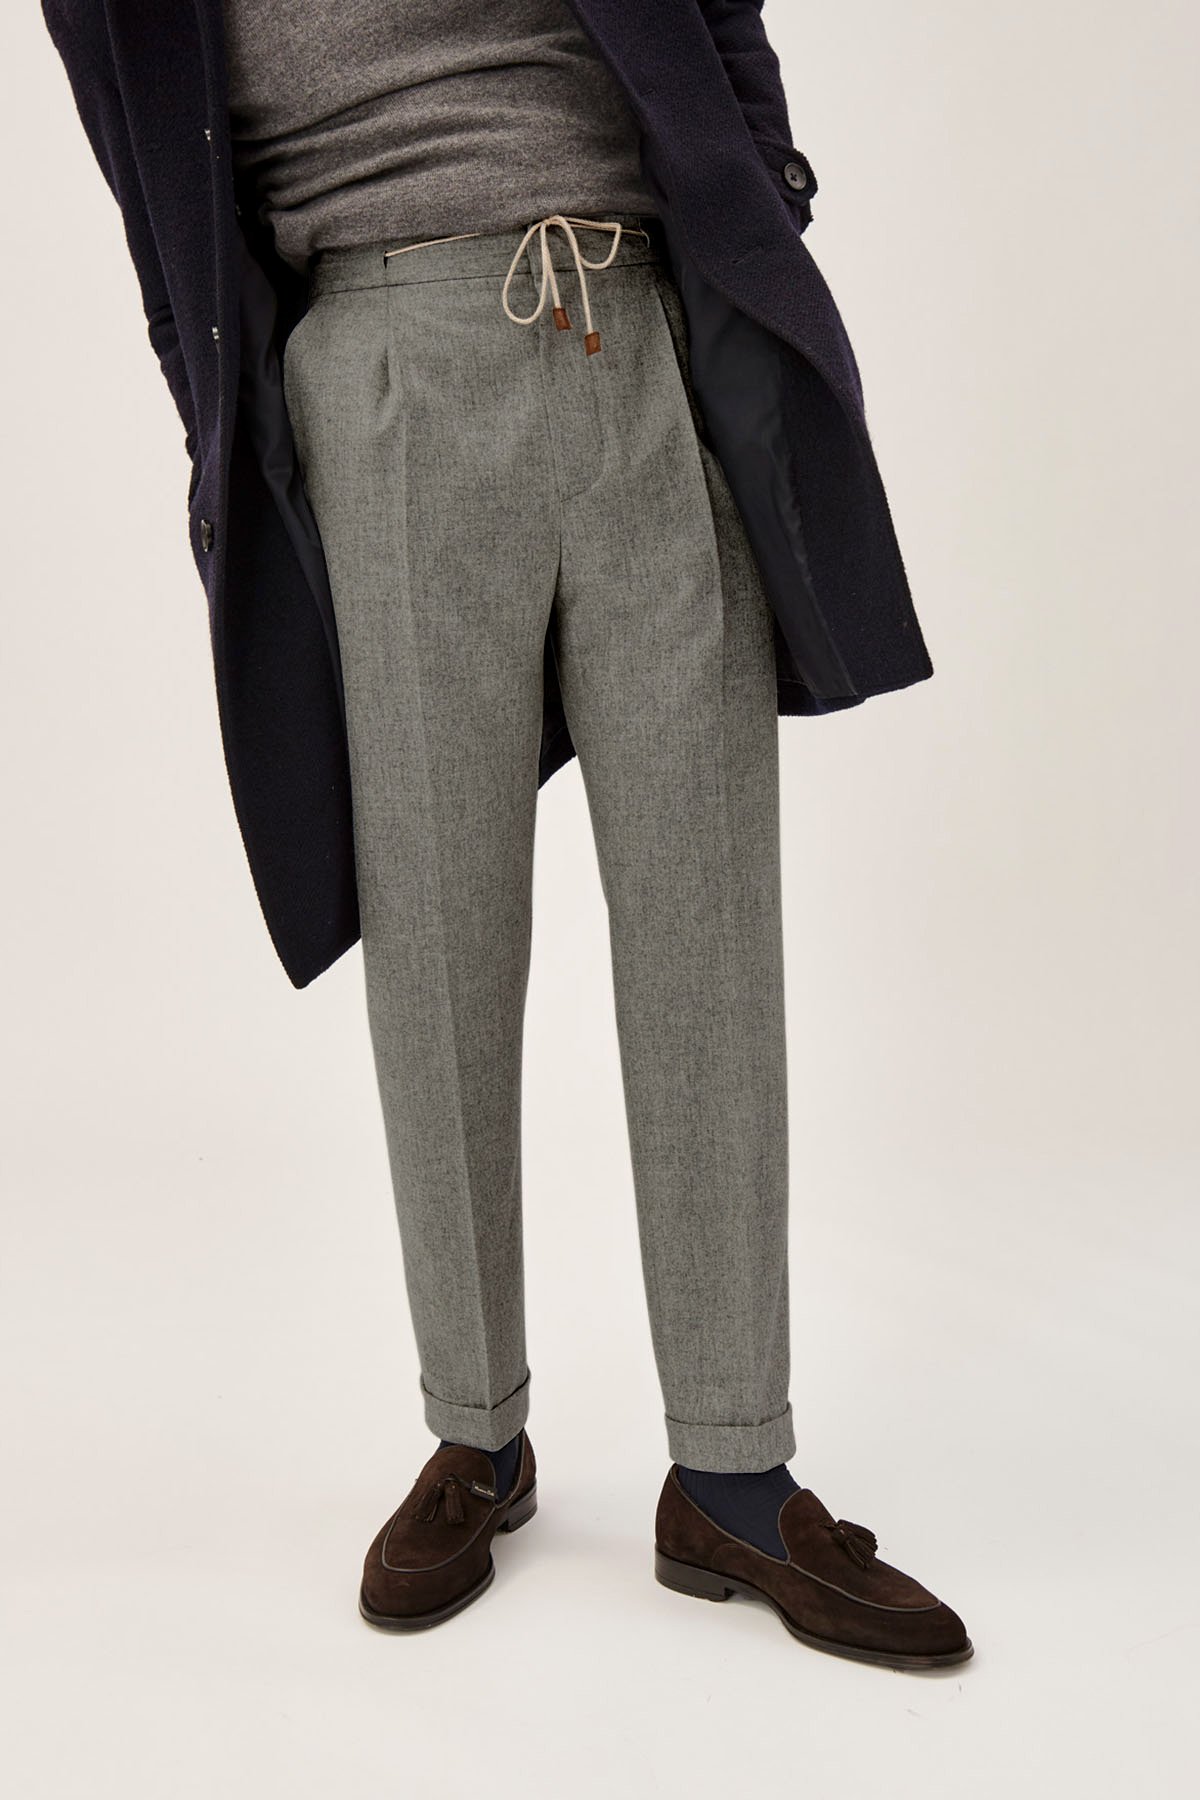 Wool trousers ethical Italian mens fashion 